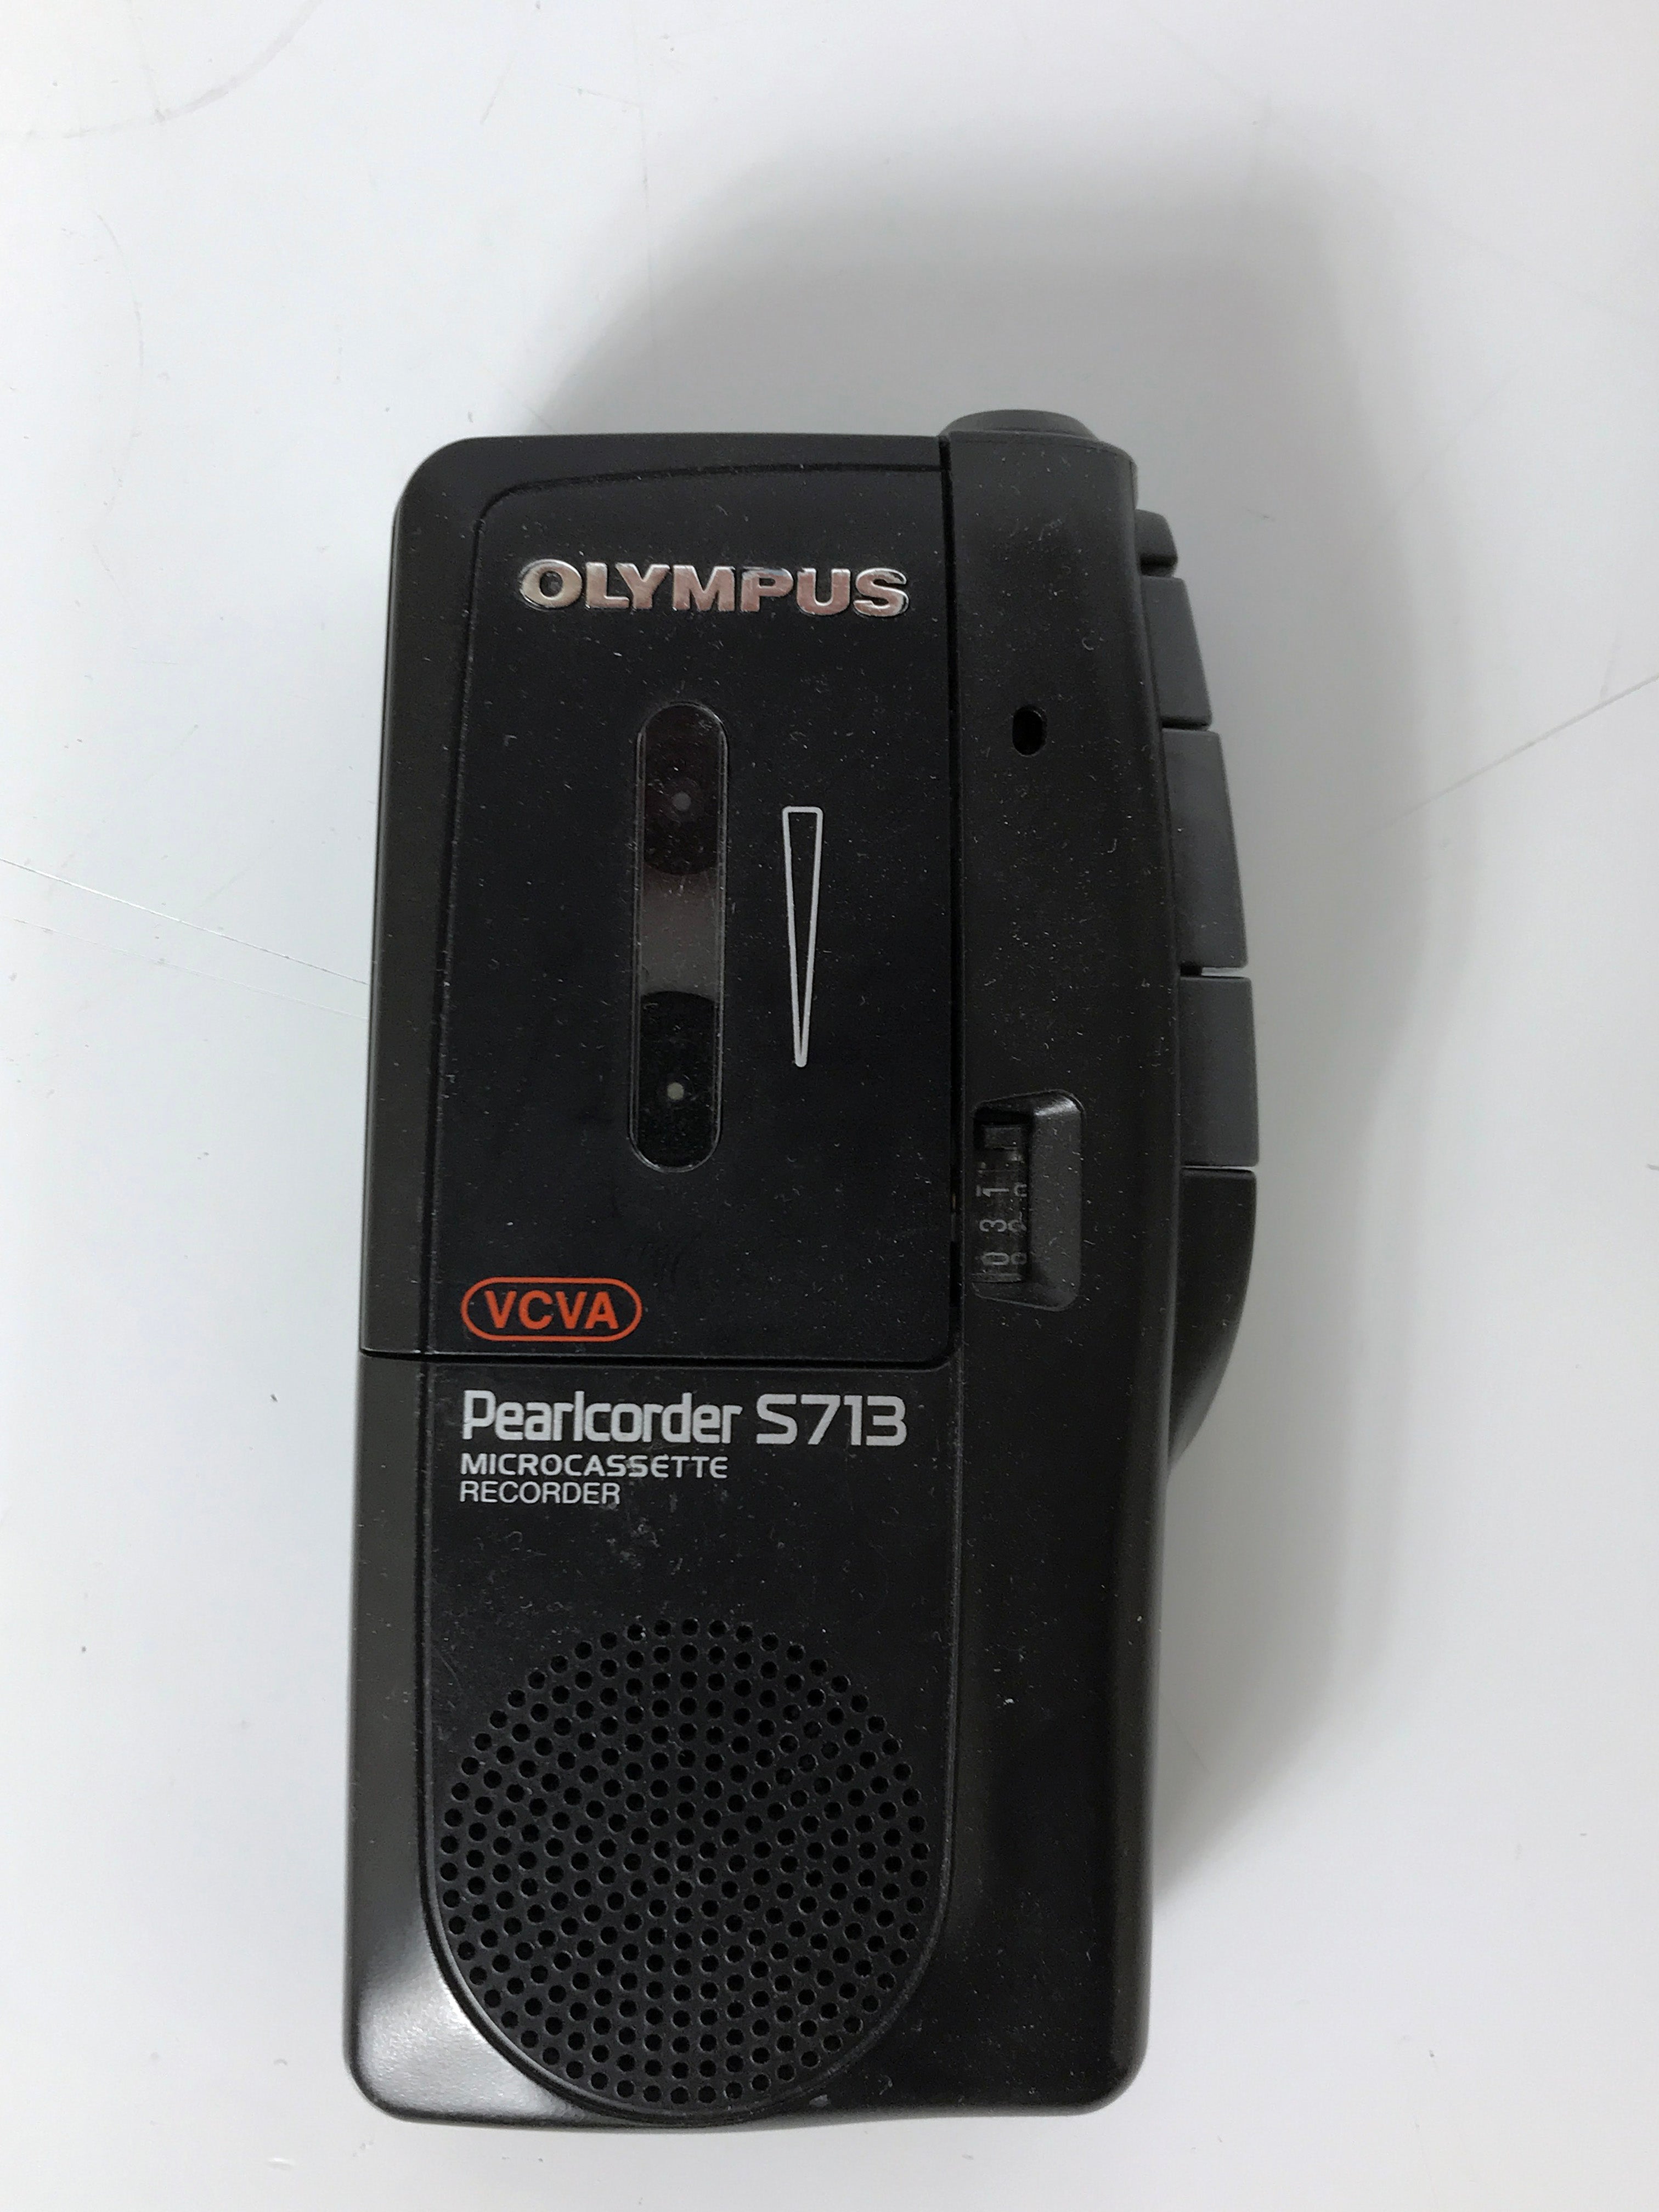 Olympus Pearlcorder S713 Microcassette Recorder